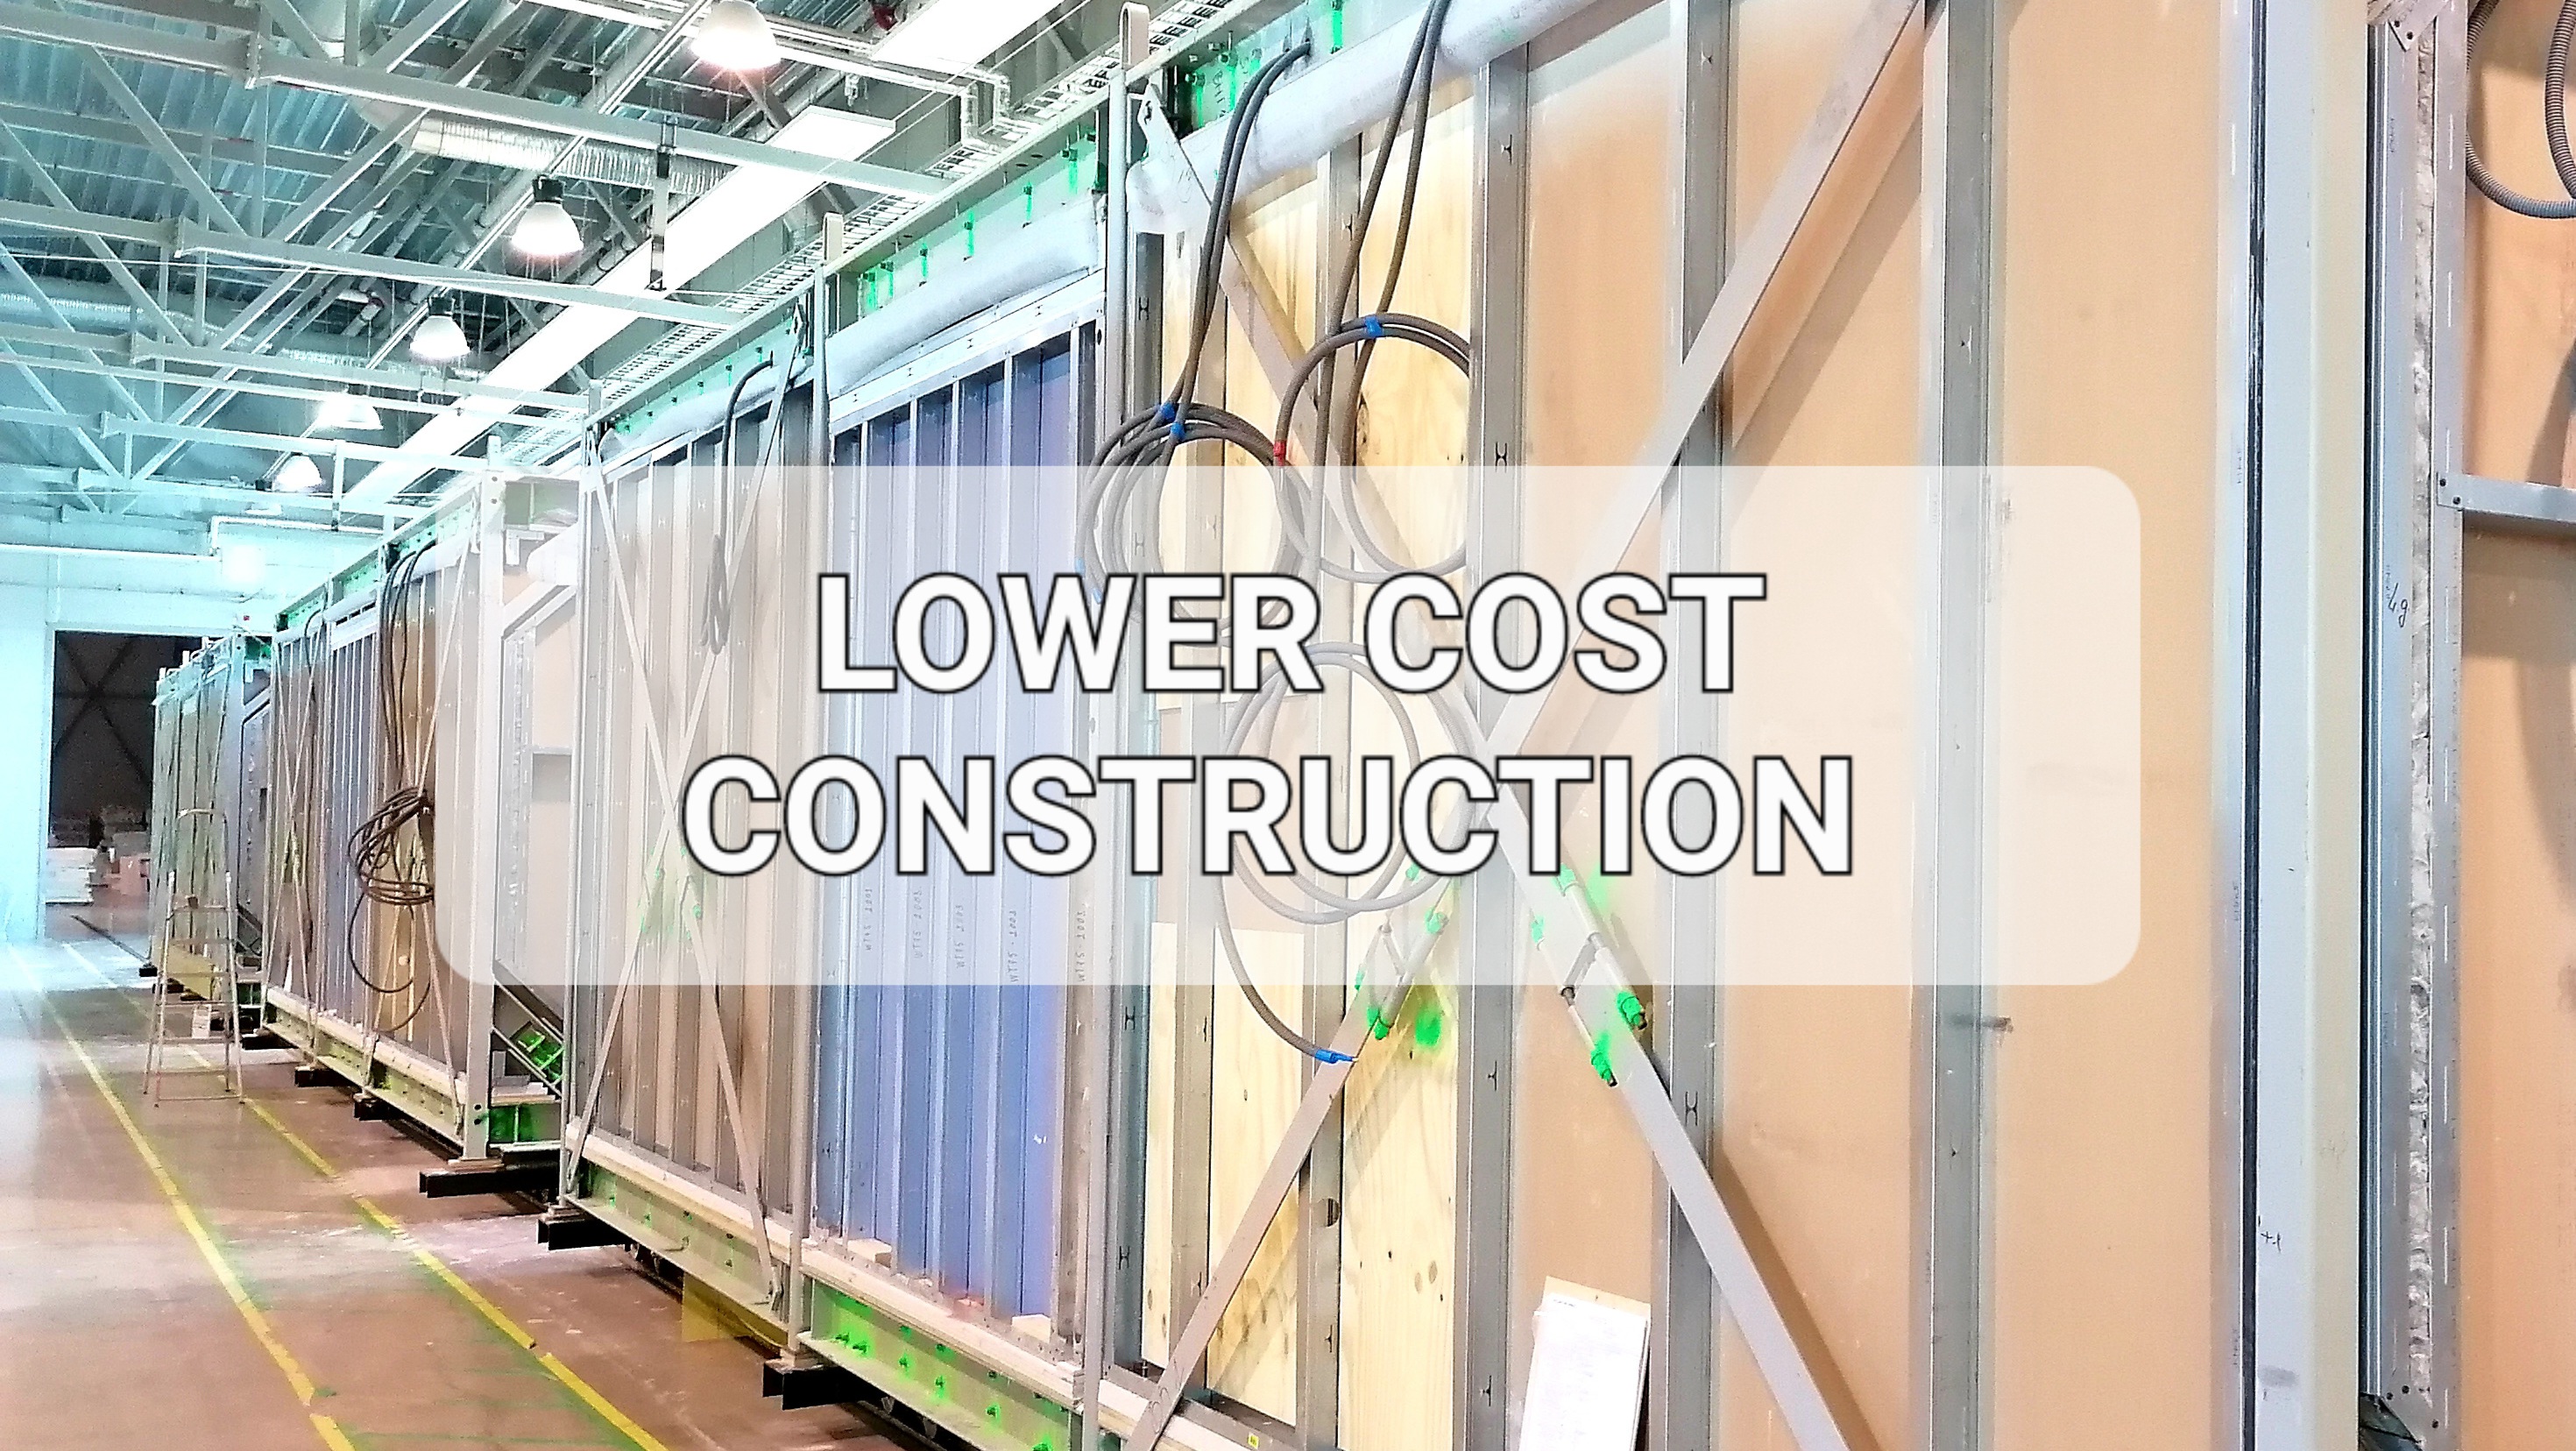 Innovation for Lower Cost Construction!